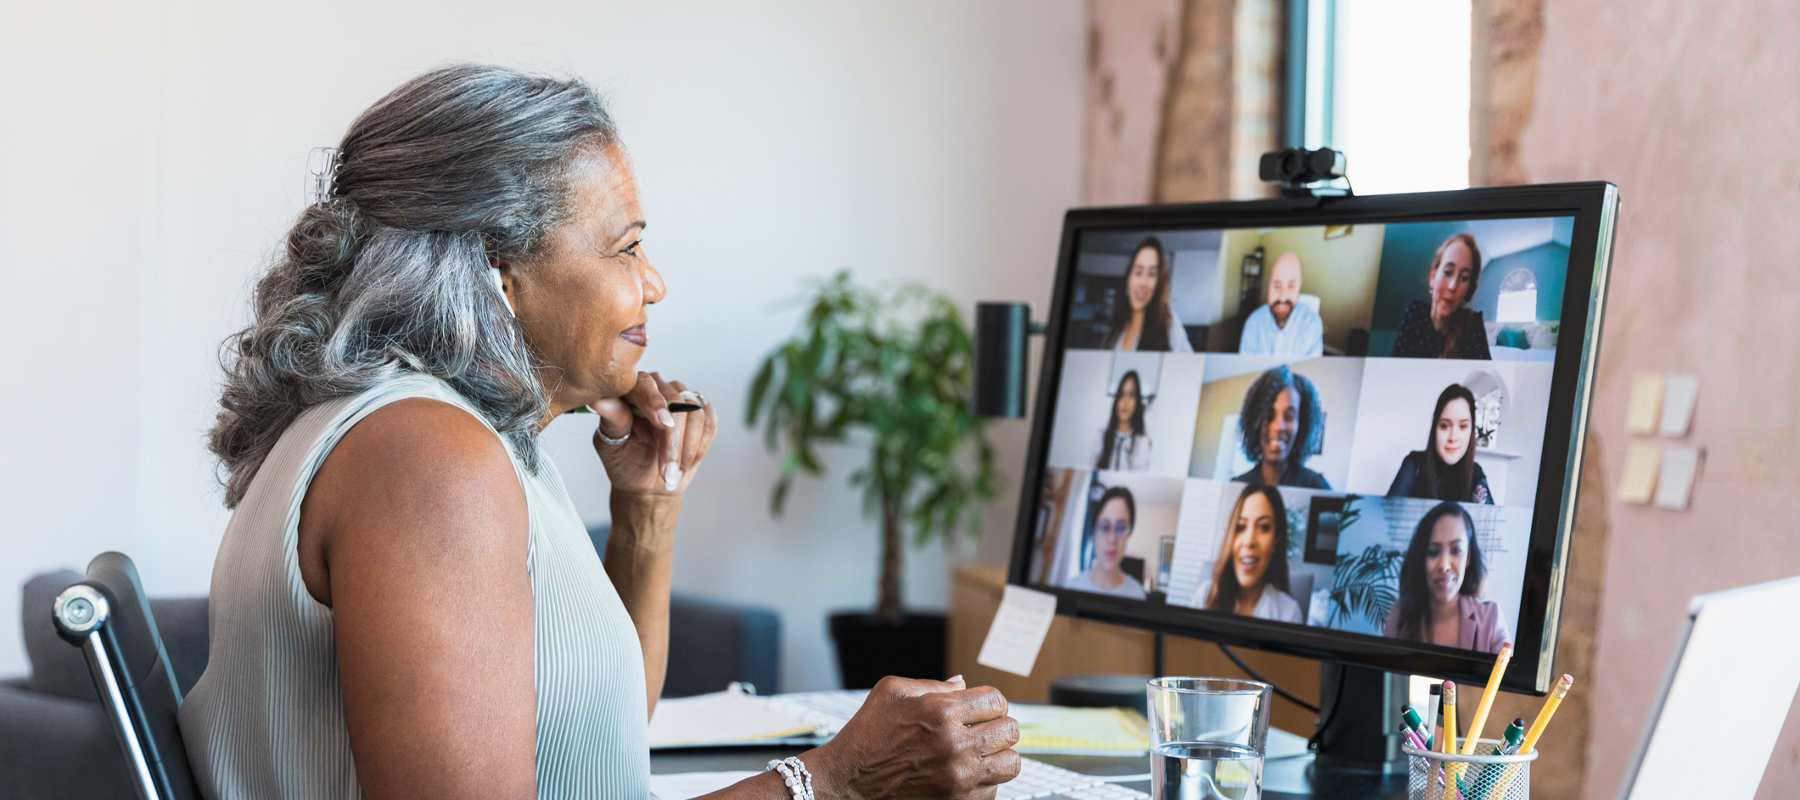 Woman managing a virtual team via video call on computer. She is older with grey hair, looking thoughtfully at the screen which shows different virtual employees.